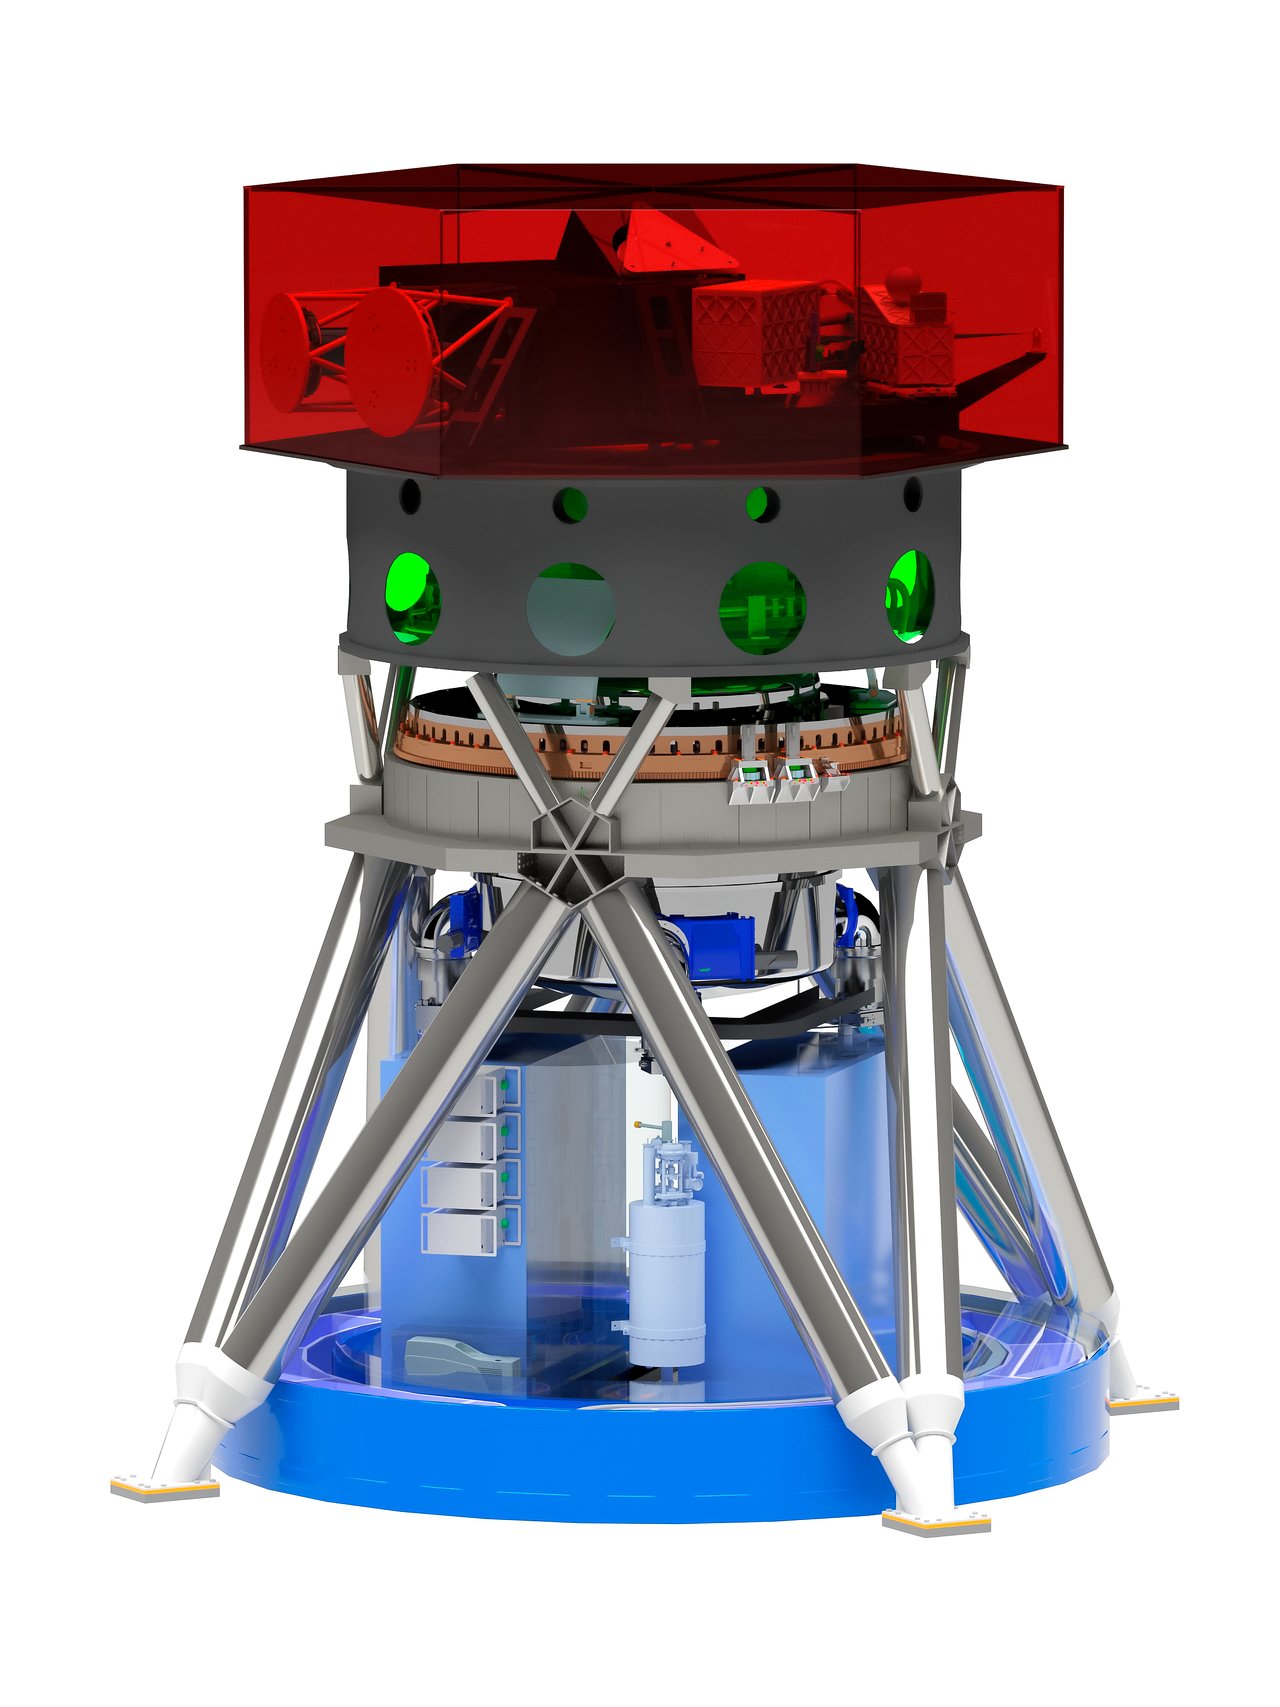 Artist depiction of the MICADO instrument set to be used with the ELT telescope upon completion